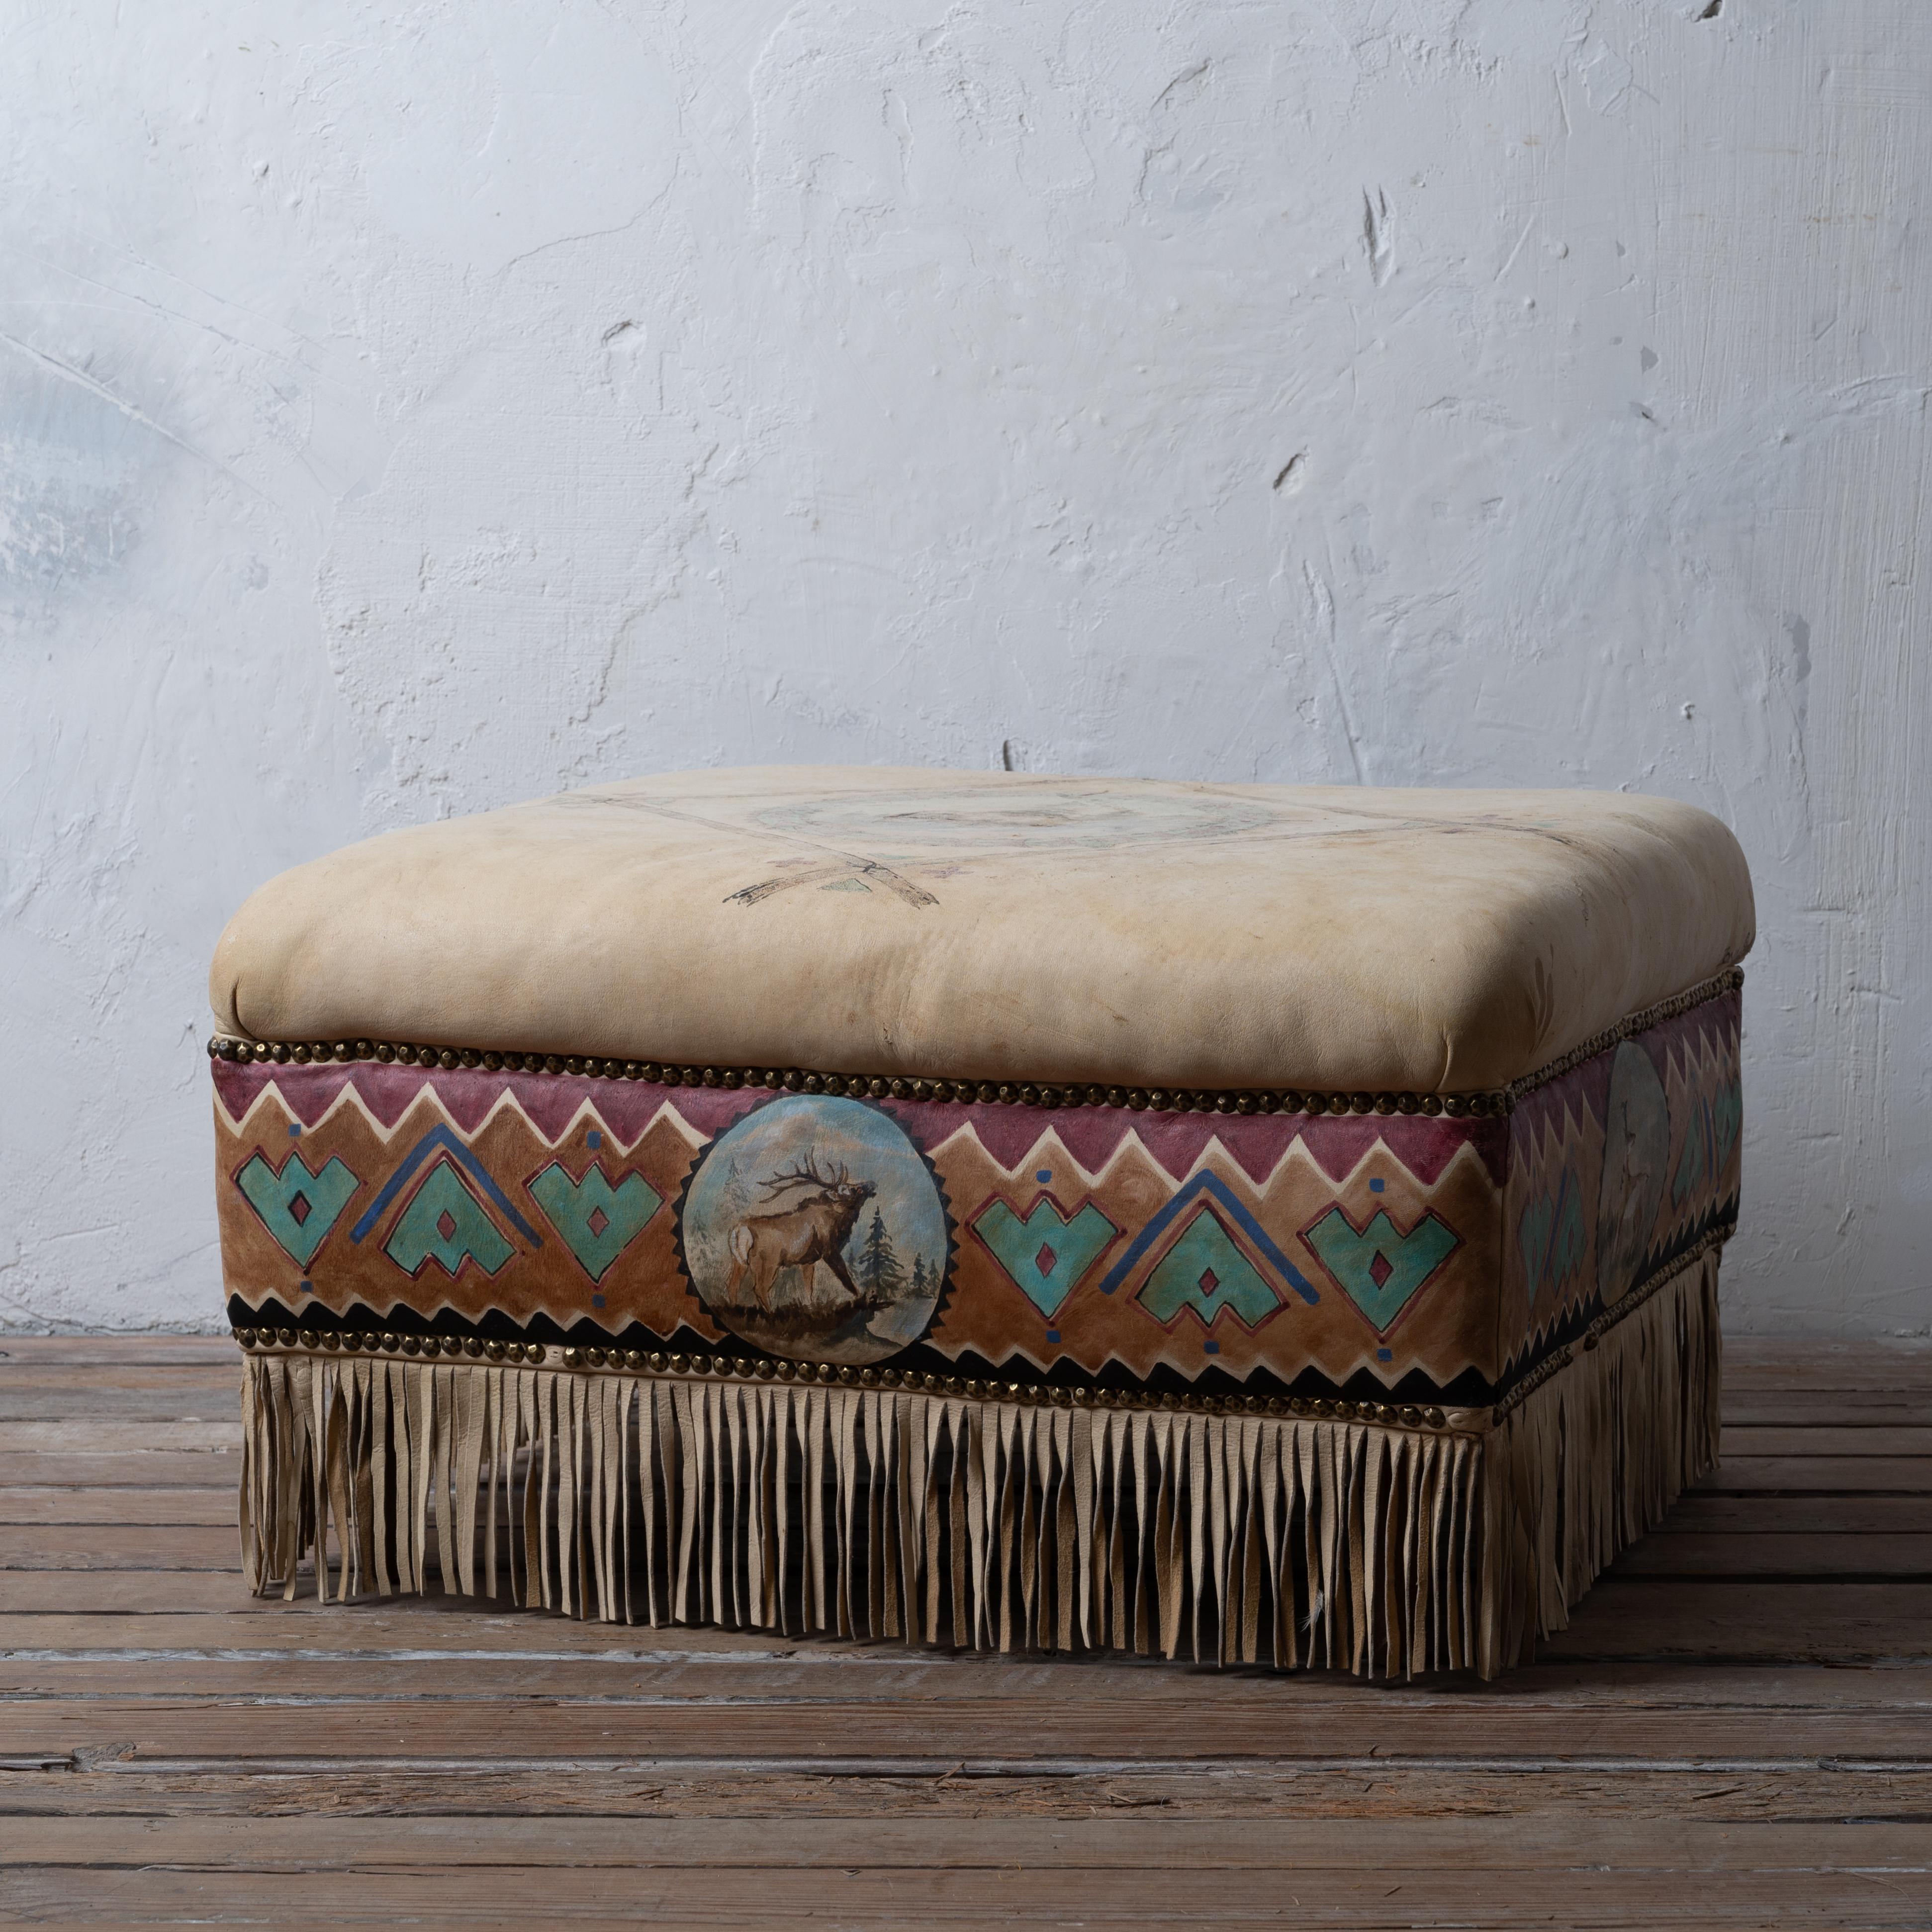 A southwestern painted buckskin ottoman by artist Zona Pilgreen.

27 ½ inches wide by 23 ½ inches deep by 15 ½ inches tall 

